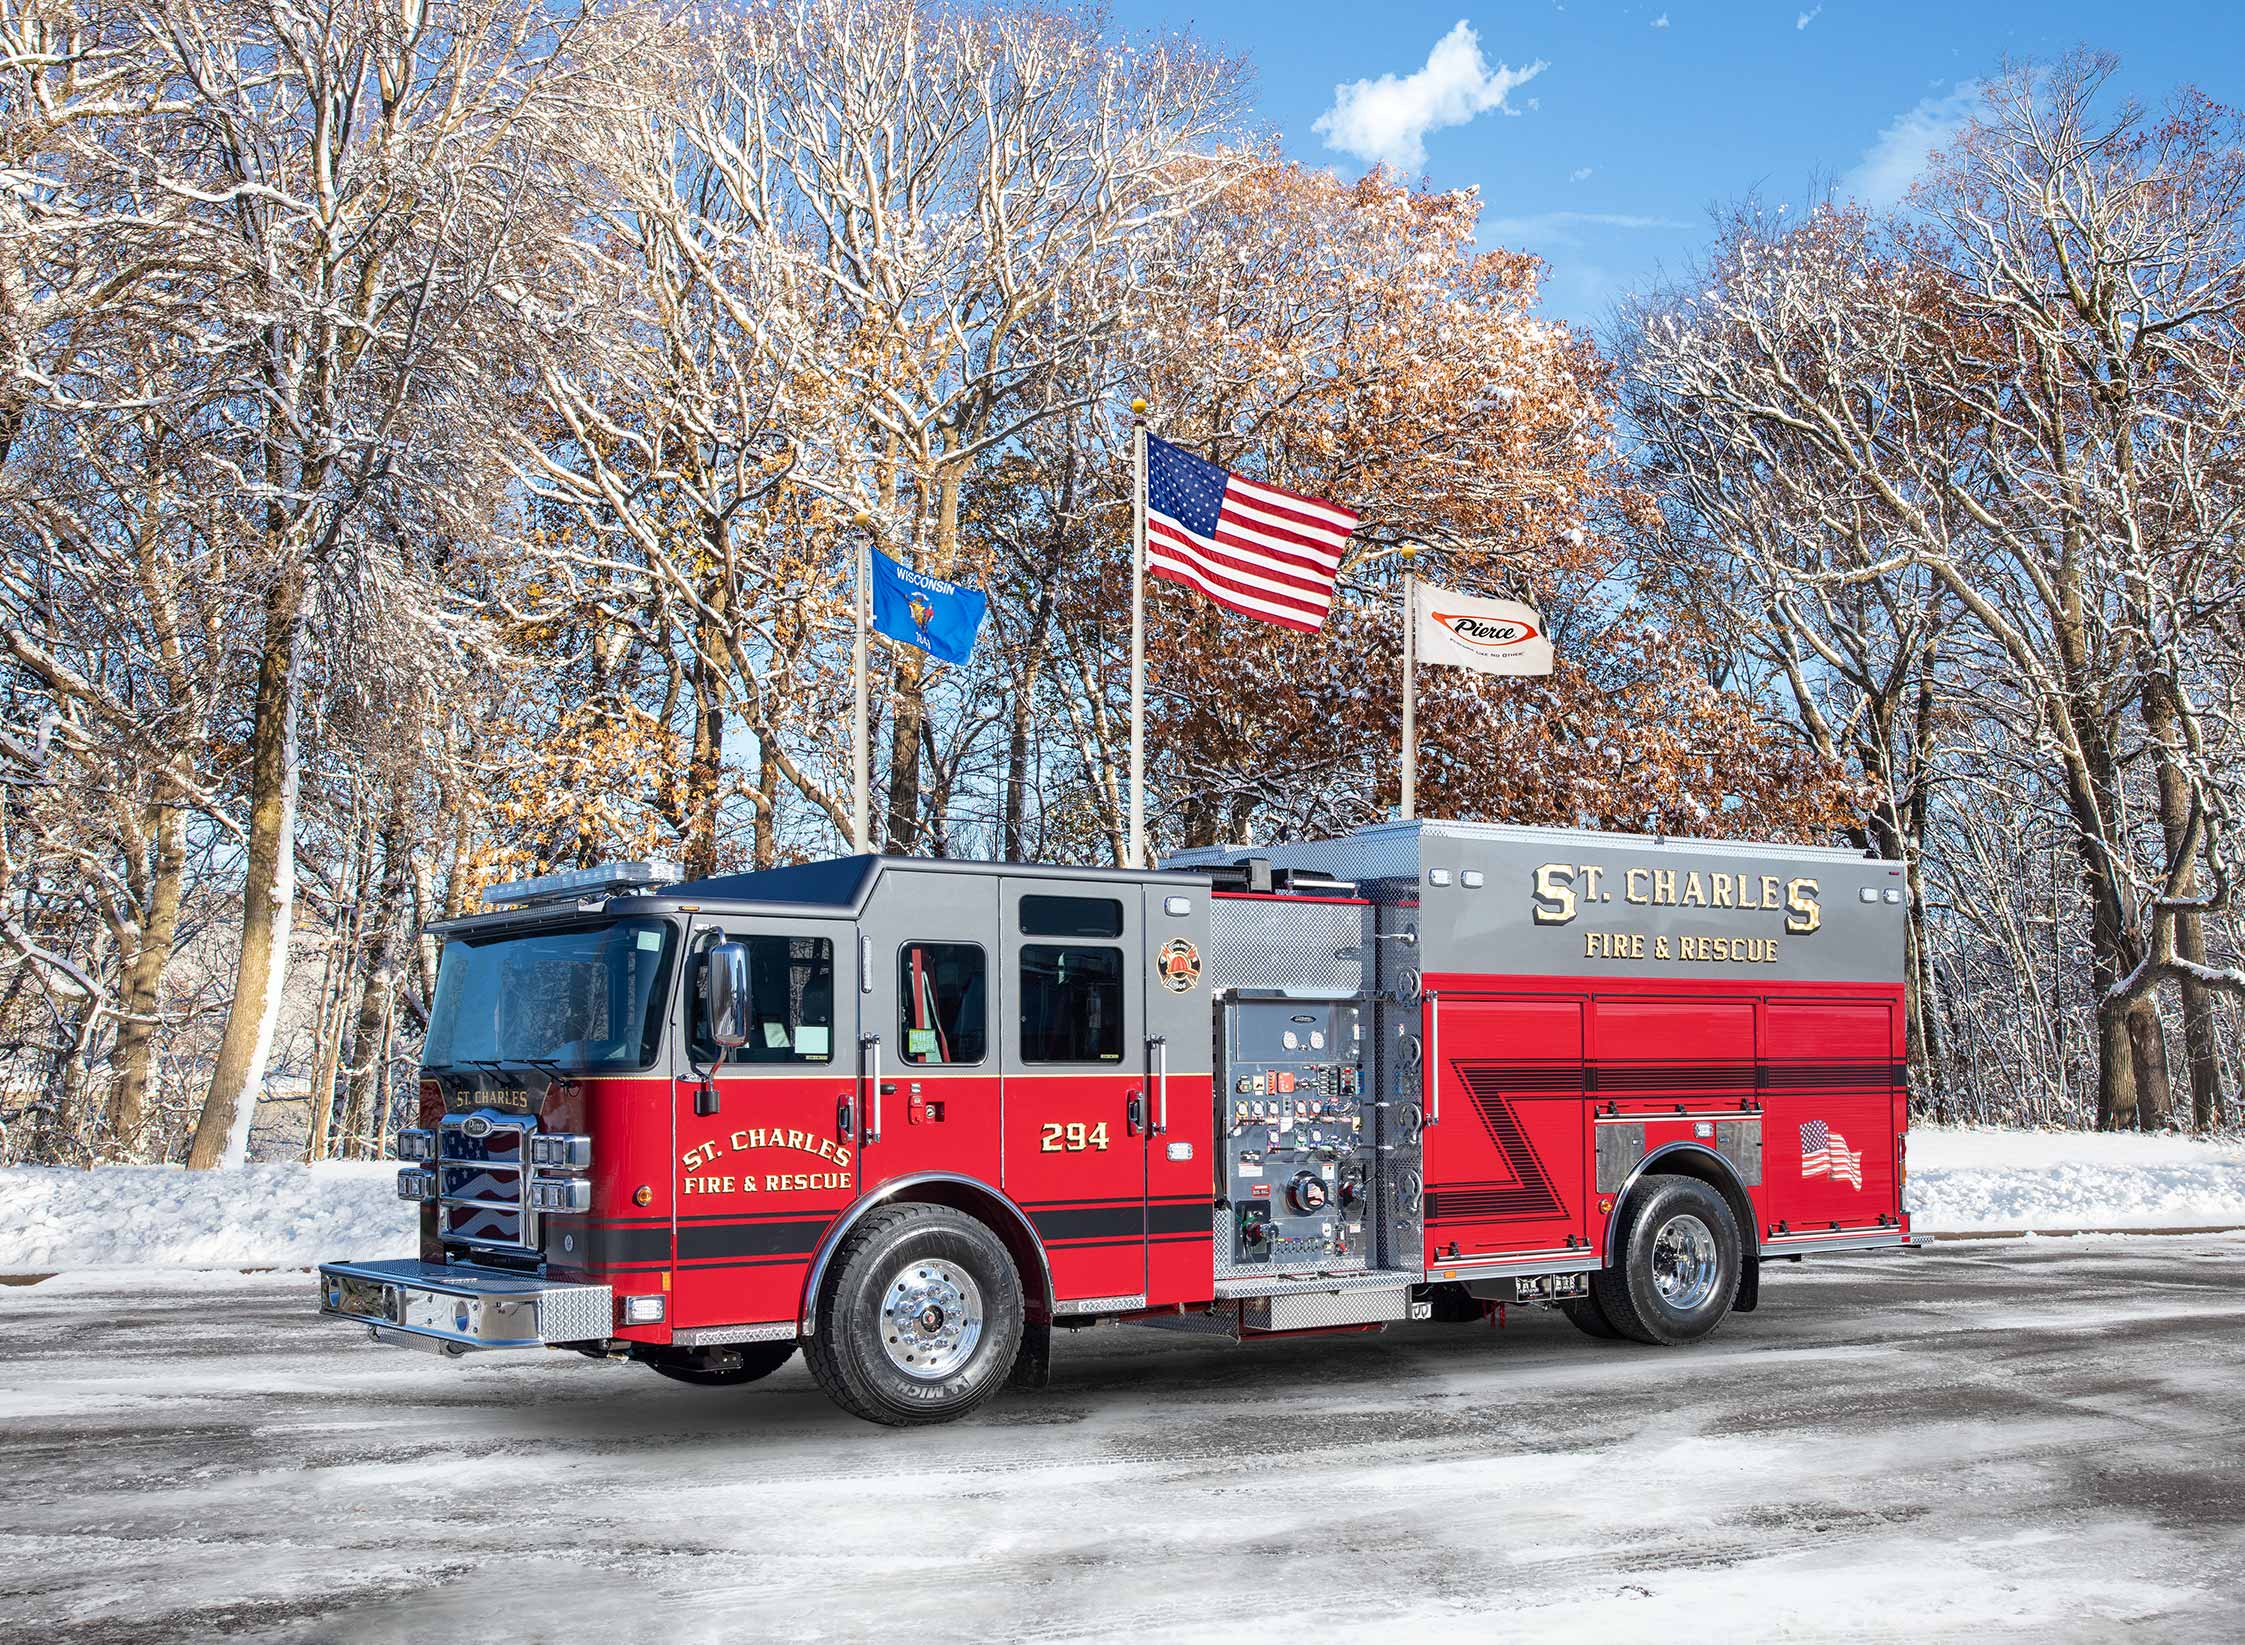 City of St. Charles Fire Department - Pumper